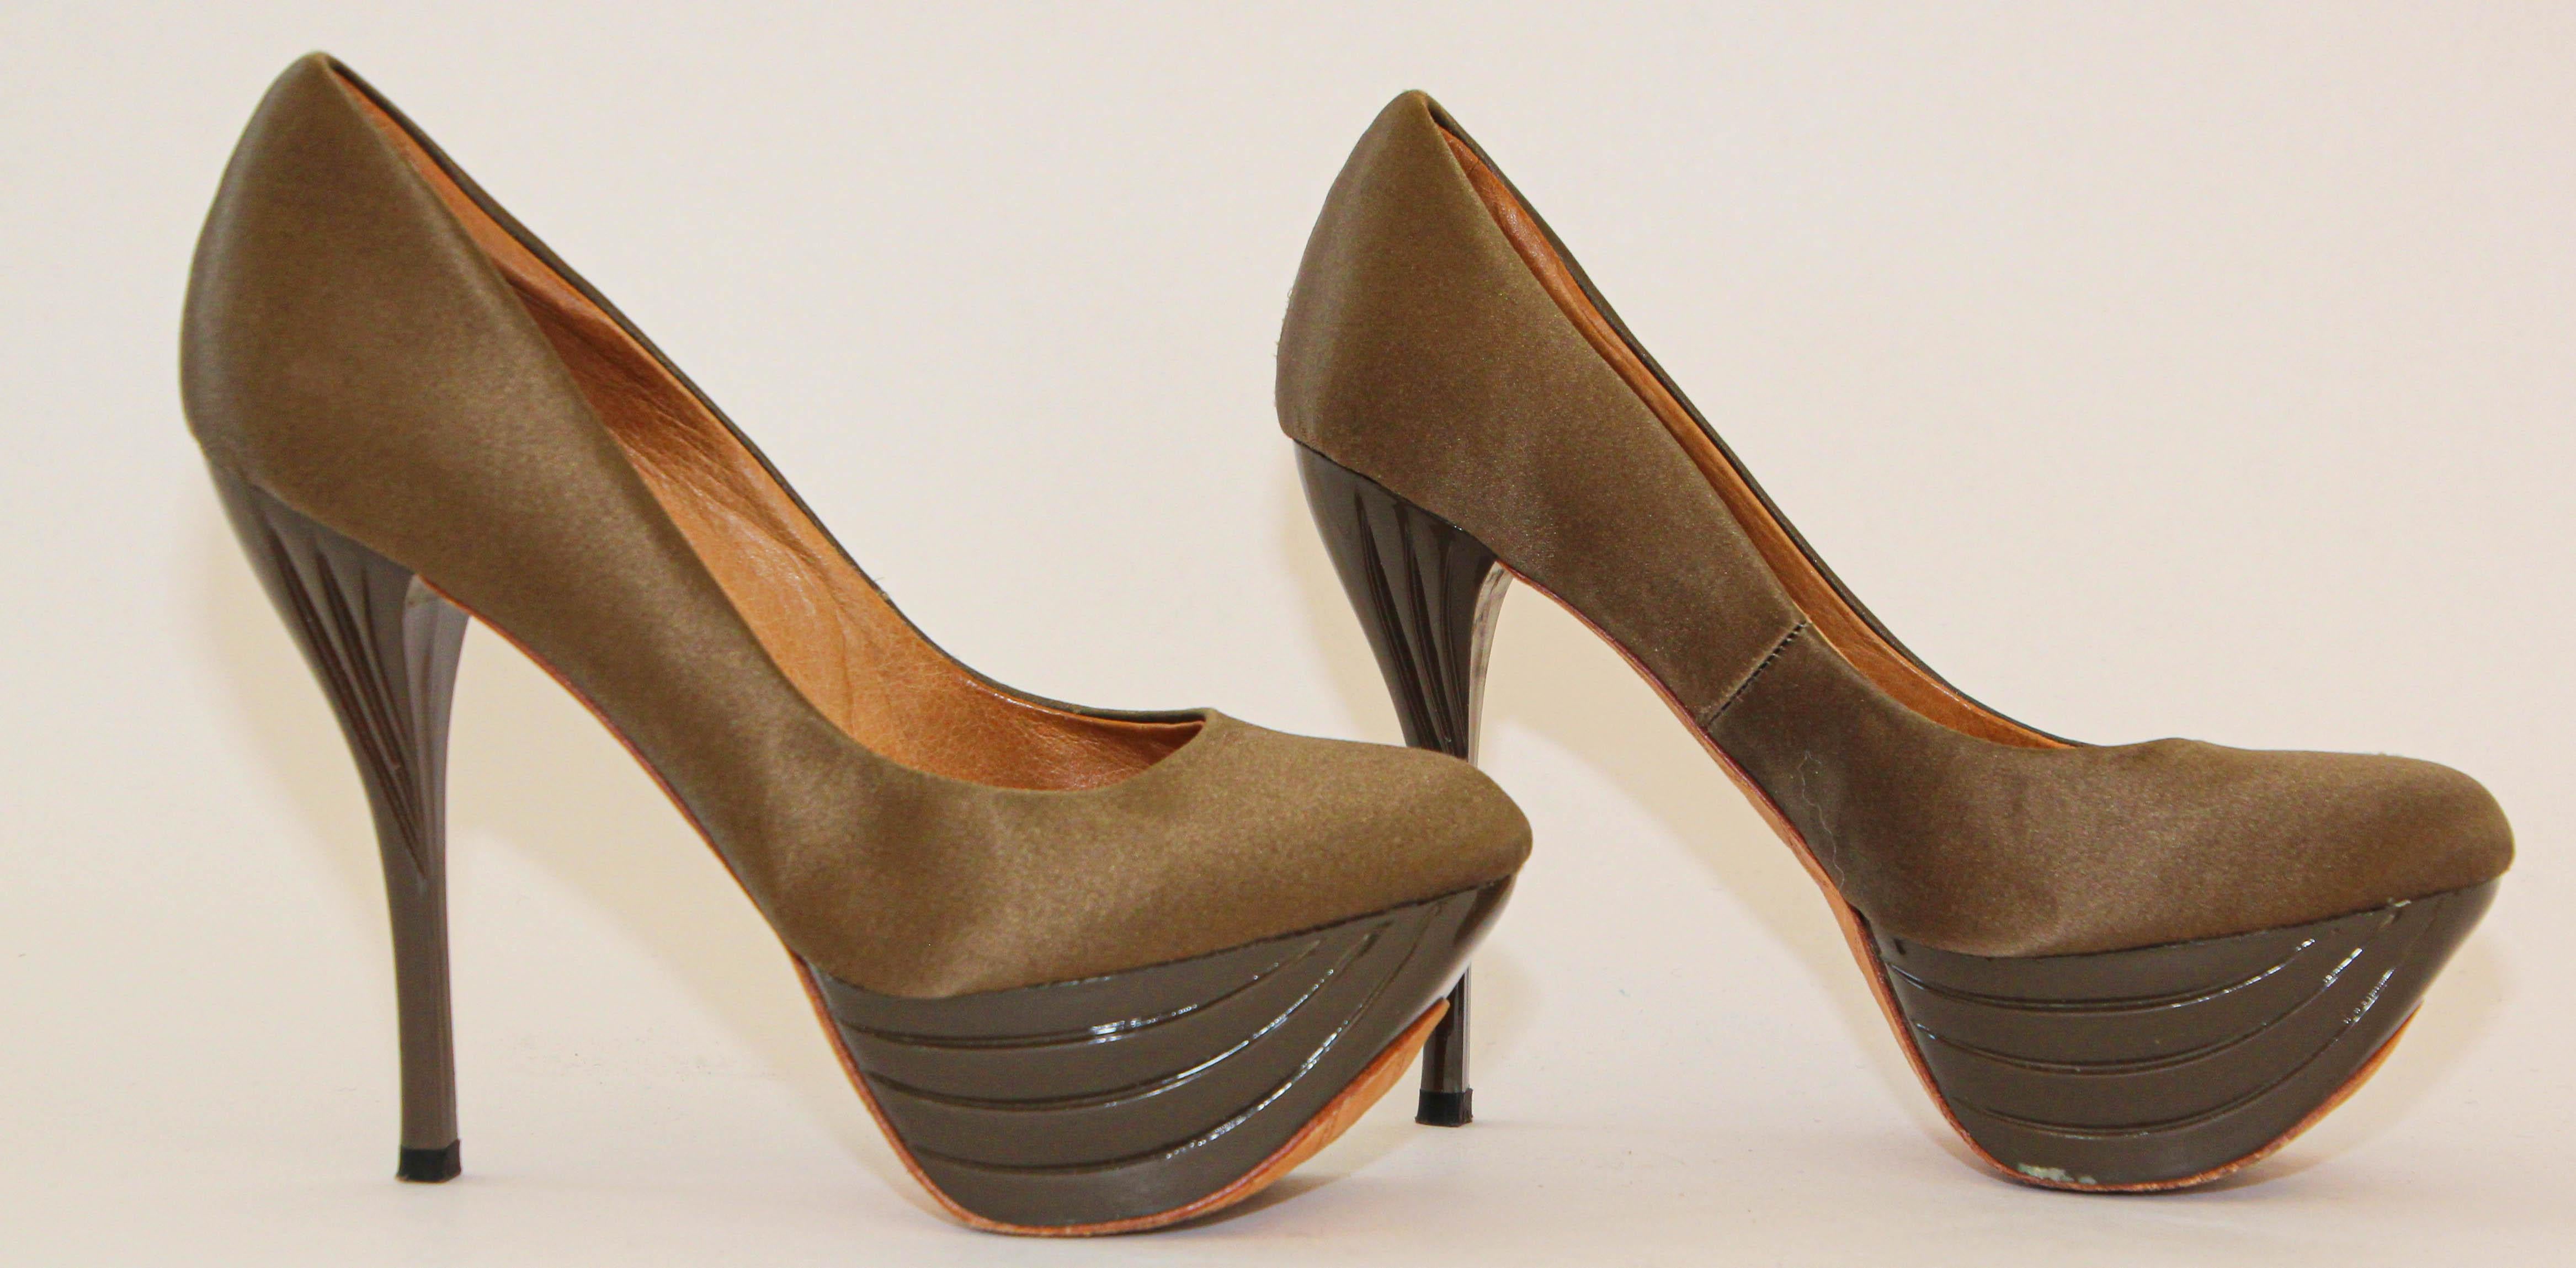 LAMB Taupe Lea Platform Heels Size 6M.
L.A.M.B. LAMB Z-Project Satin and Lacquer dark taupe heels.
Gwen Stefani’s L.A.M.B. Collection: Carefree Platform Stilletto Heels can make any outfit stand out!
Color: Taupe which goes with almost any